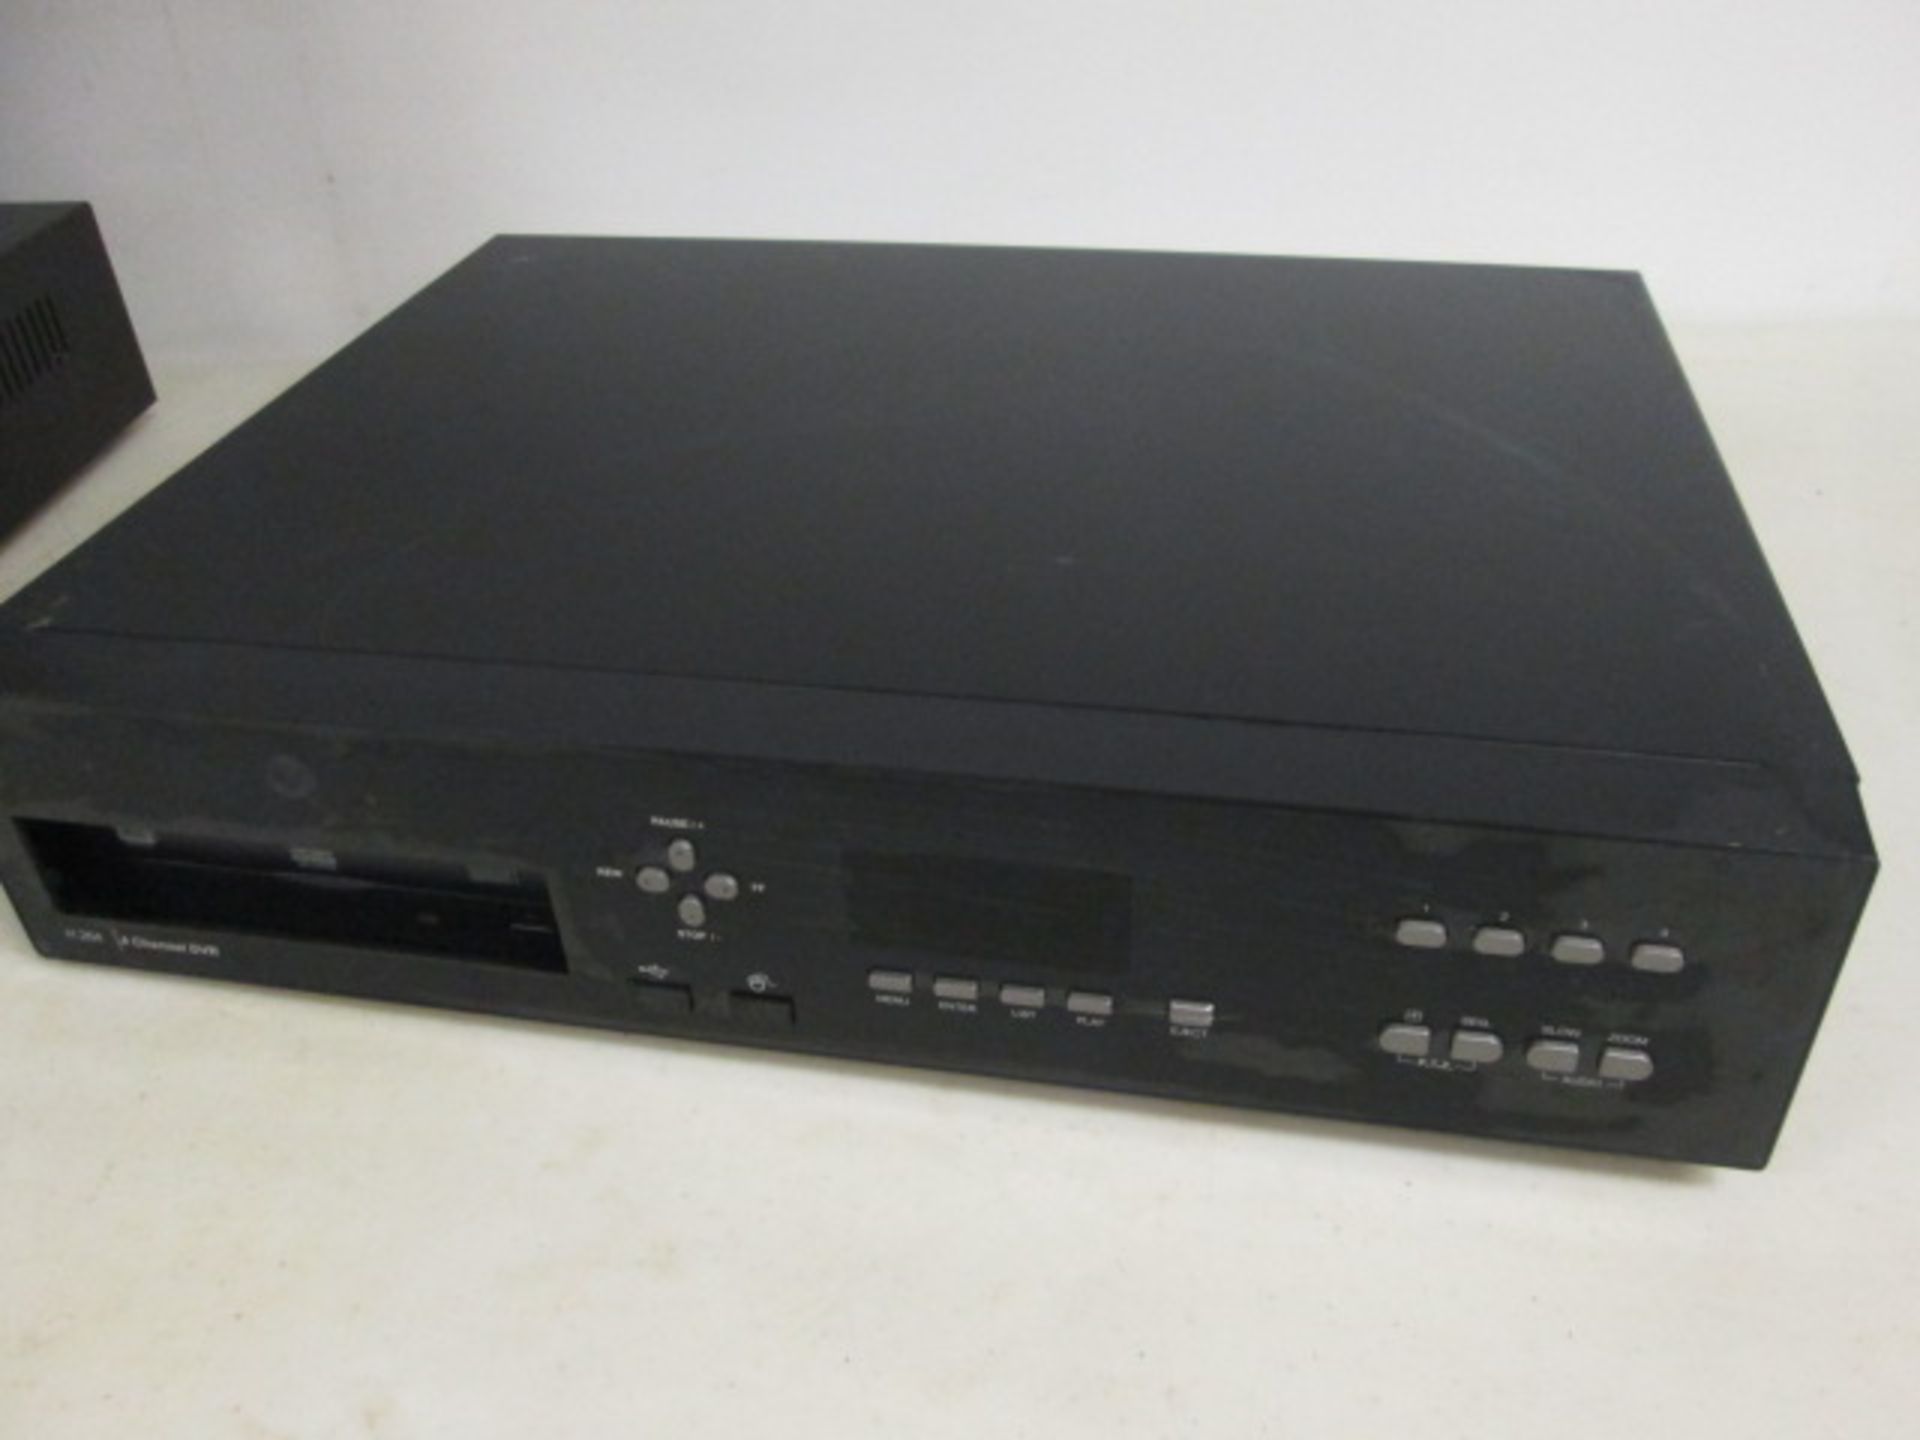 2 x H.264 4 Channel DVR & 2 x VSII CCTV Monitor. No Power Supplies & Unable to Power Up. - Image 3 of 4